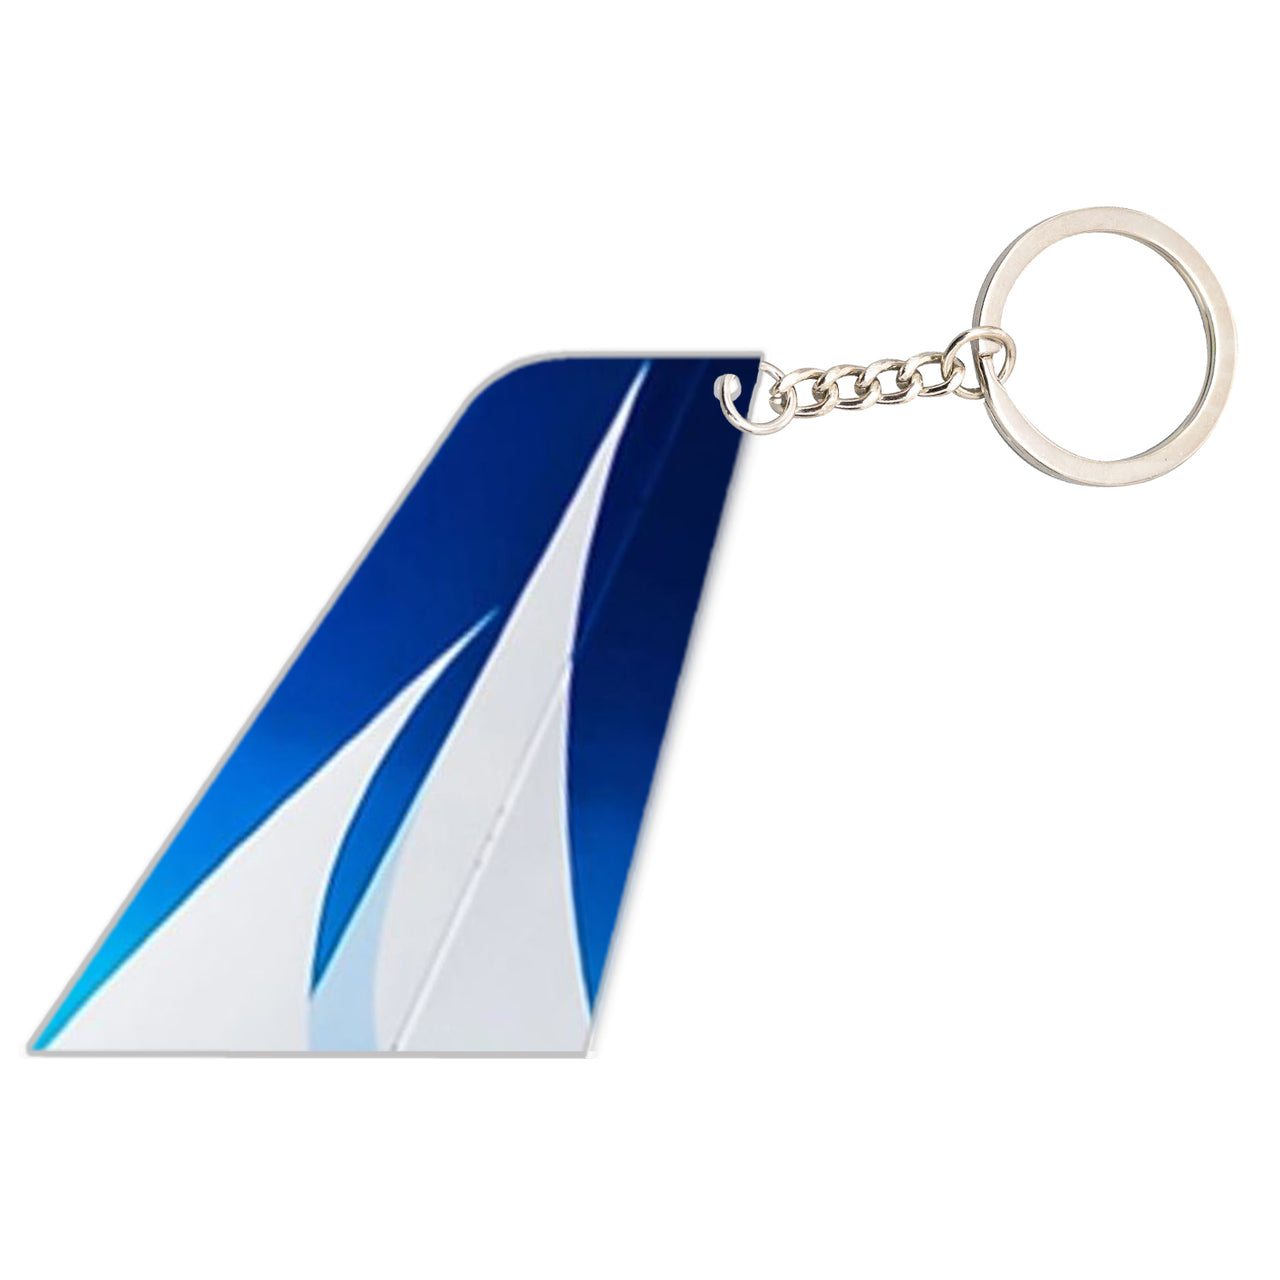 Corsair Airlines Designed Tail Key Chains